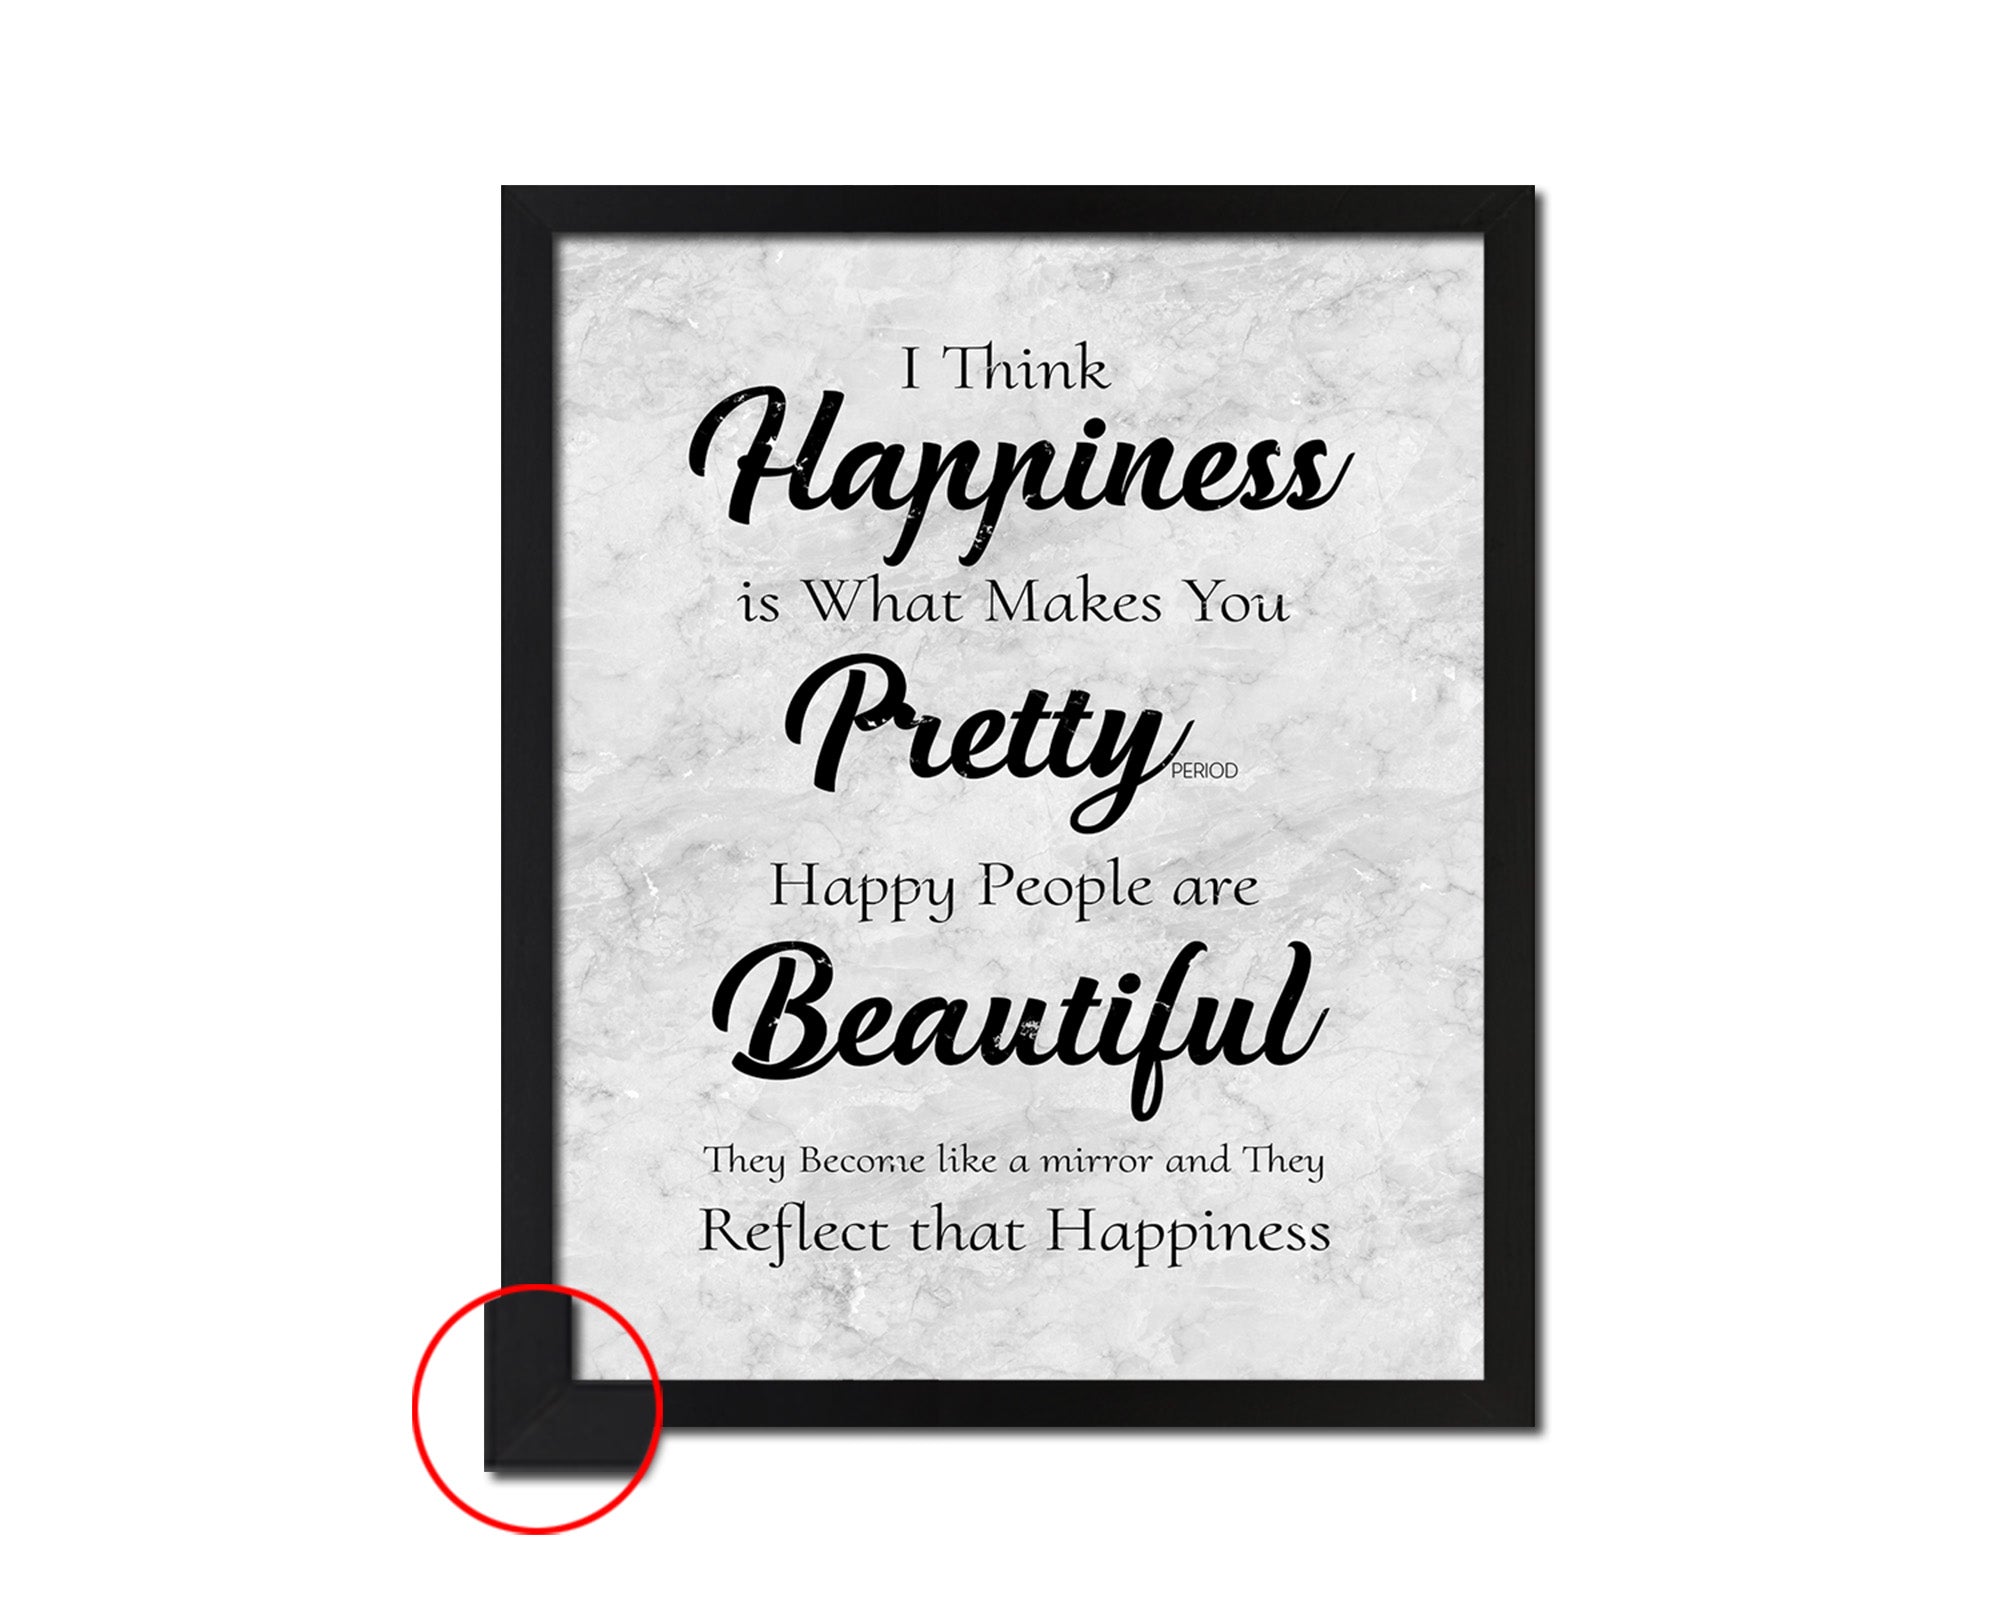 I think happiness is what makes you pretty Quote Framed Print Wall Art Decor Gifts